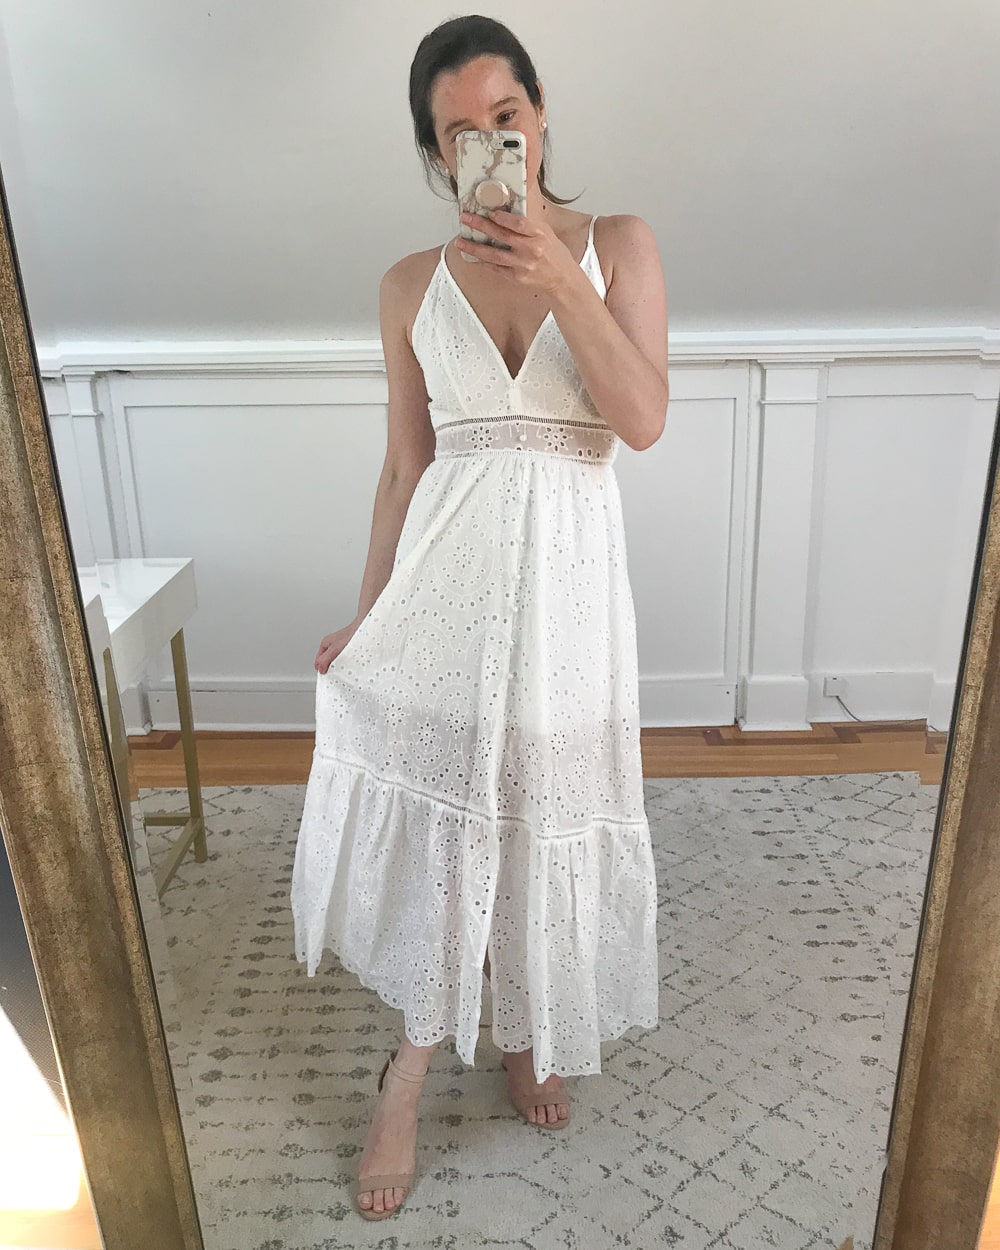 Amazon white lace maxi dress tried on by affordable fashion blogger Stephanie Ziajka on Diary of a Debutante